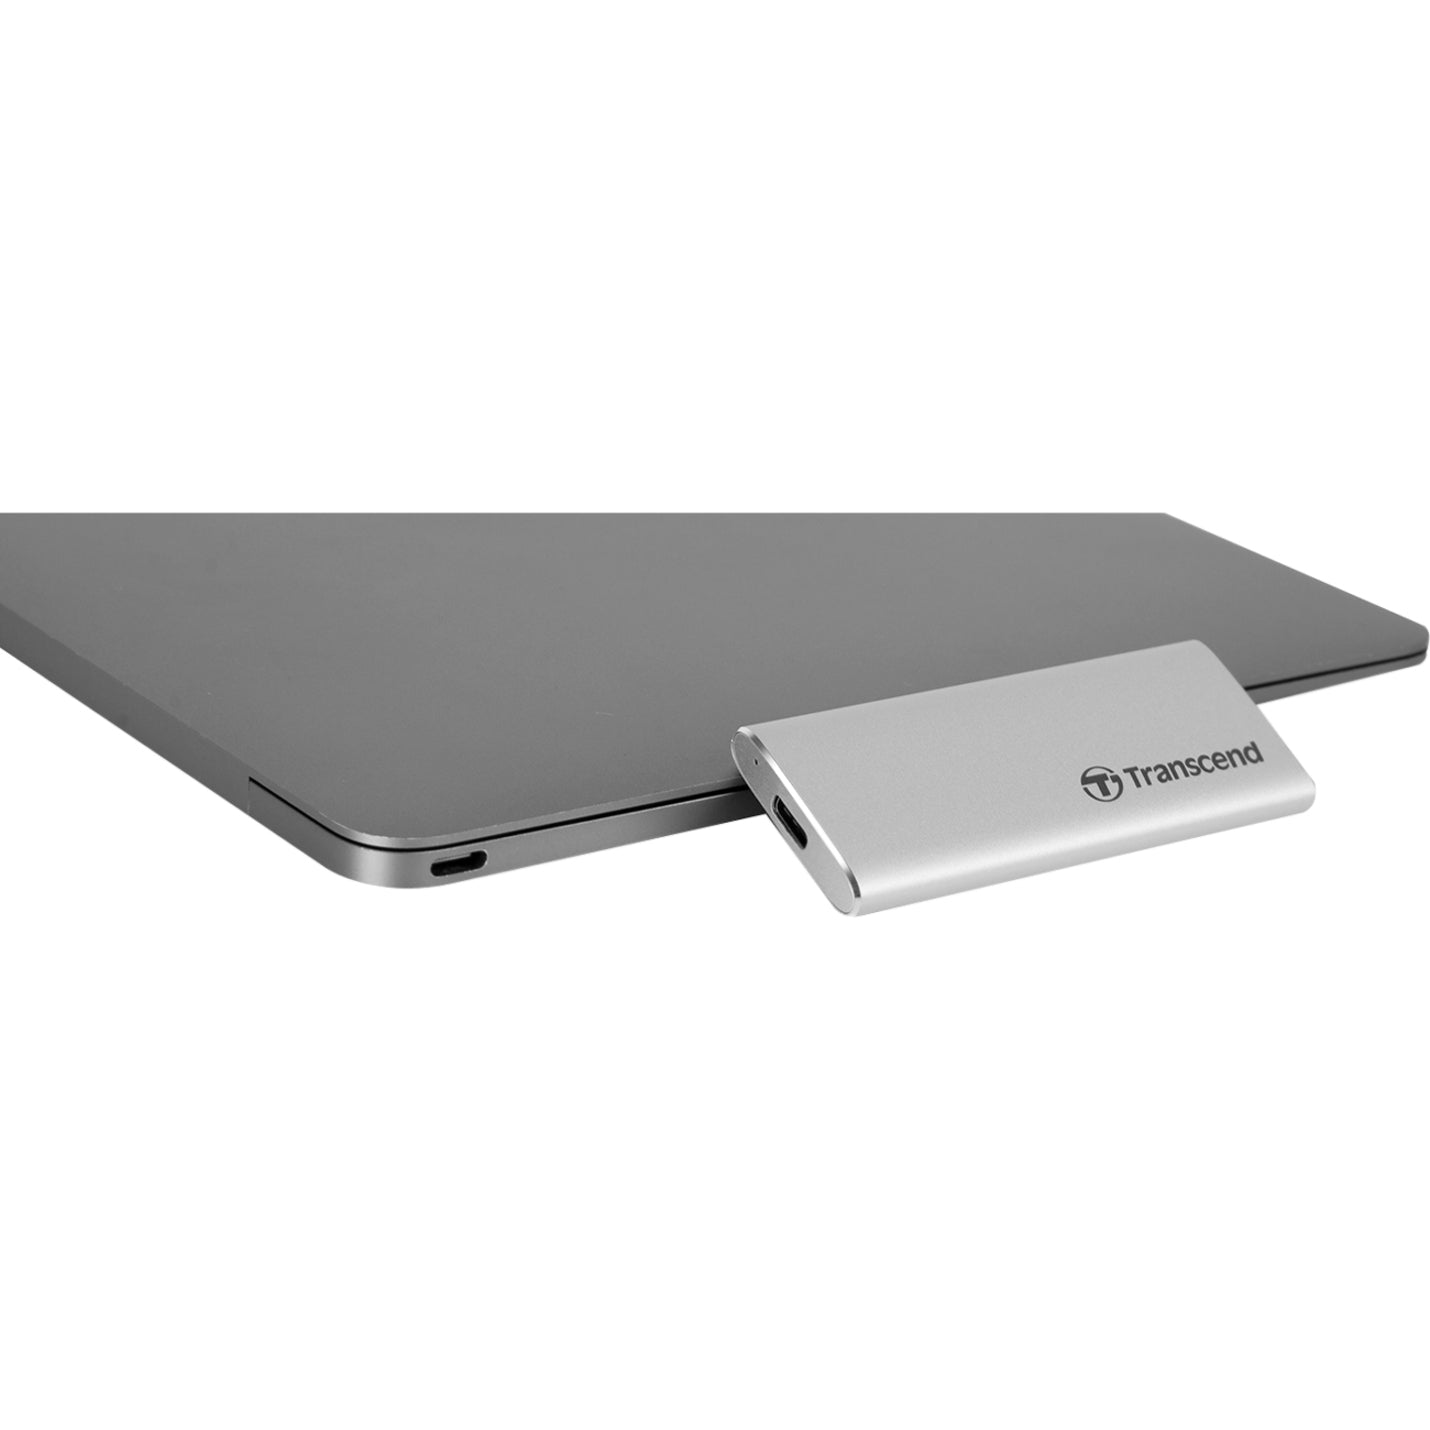 Transcend ESD240C 240 GB Portable Solid State Drive - External - SATA - Silver